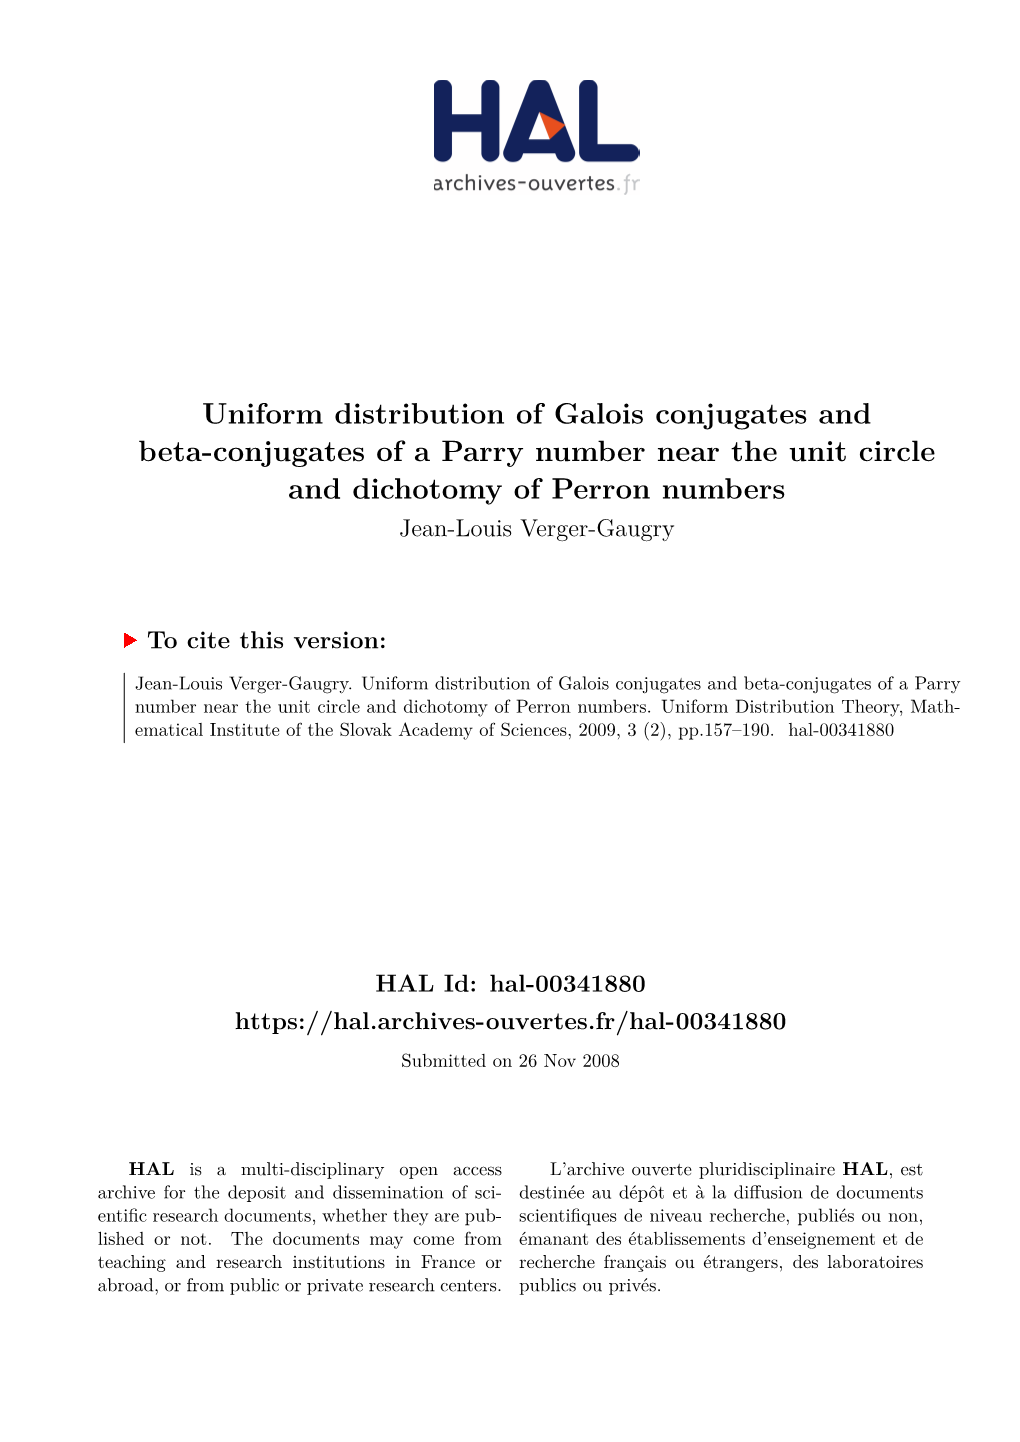 Uniform Distribution of Galois Conjugates and Beta-Conjugates of a Parry Number Near the Unit Circle and Dichotomy of Perron Numbers Jean-Louis Verger-Gaugry